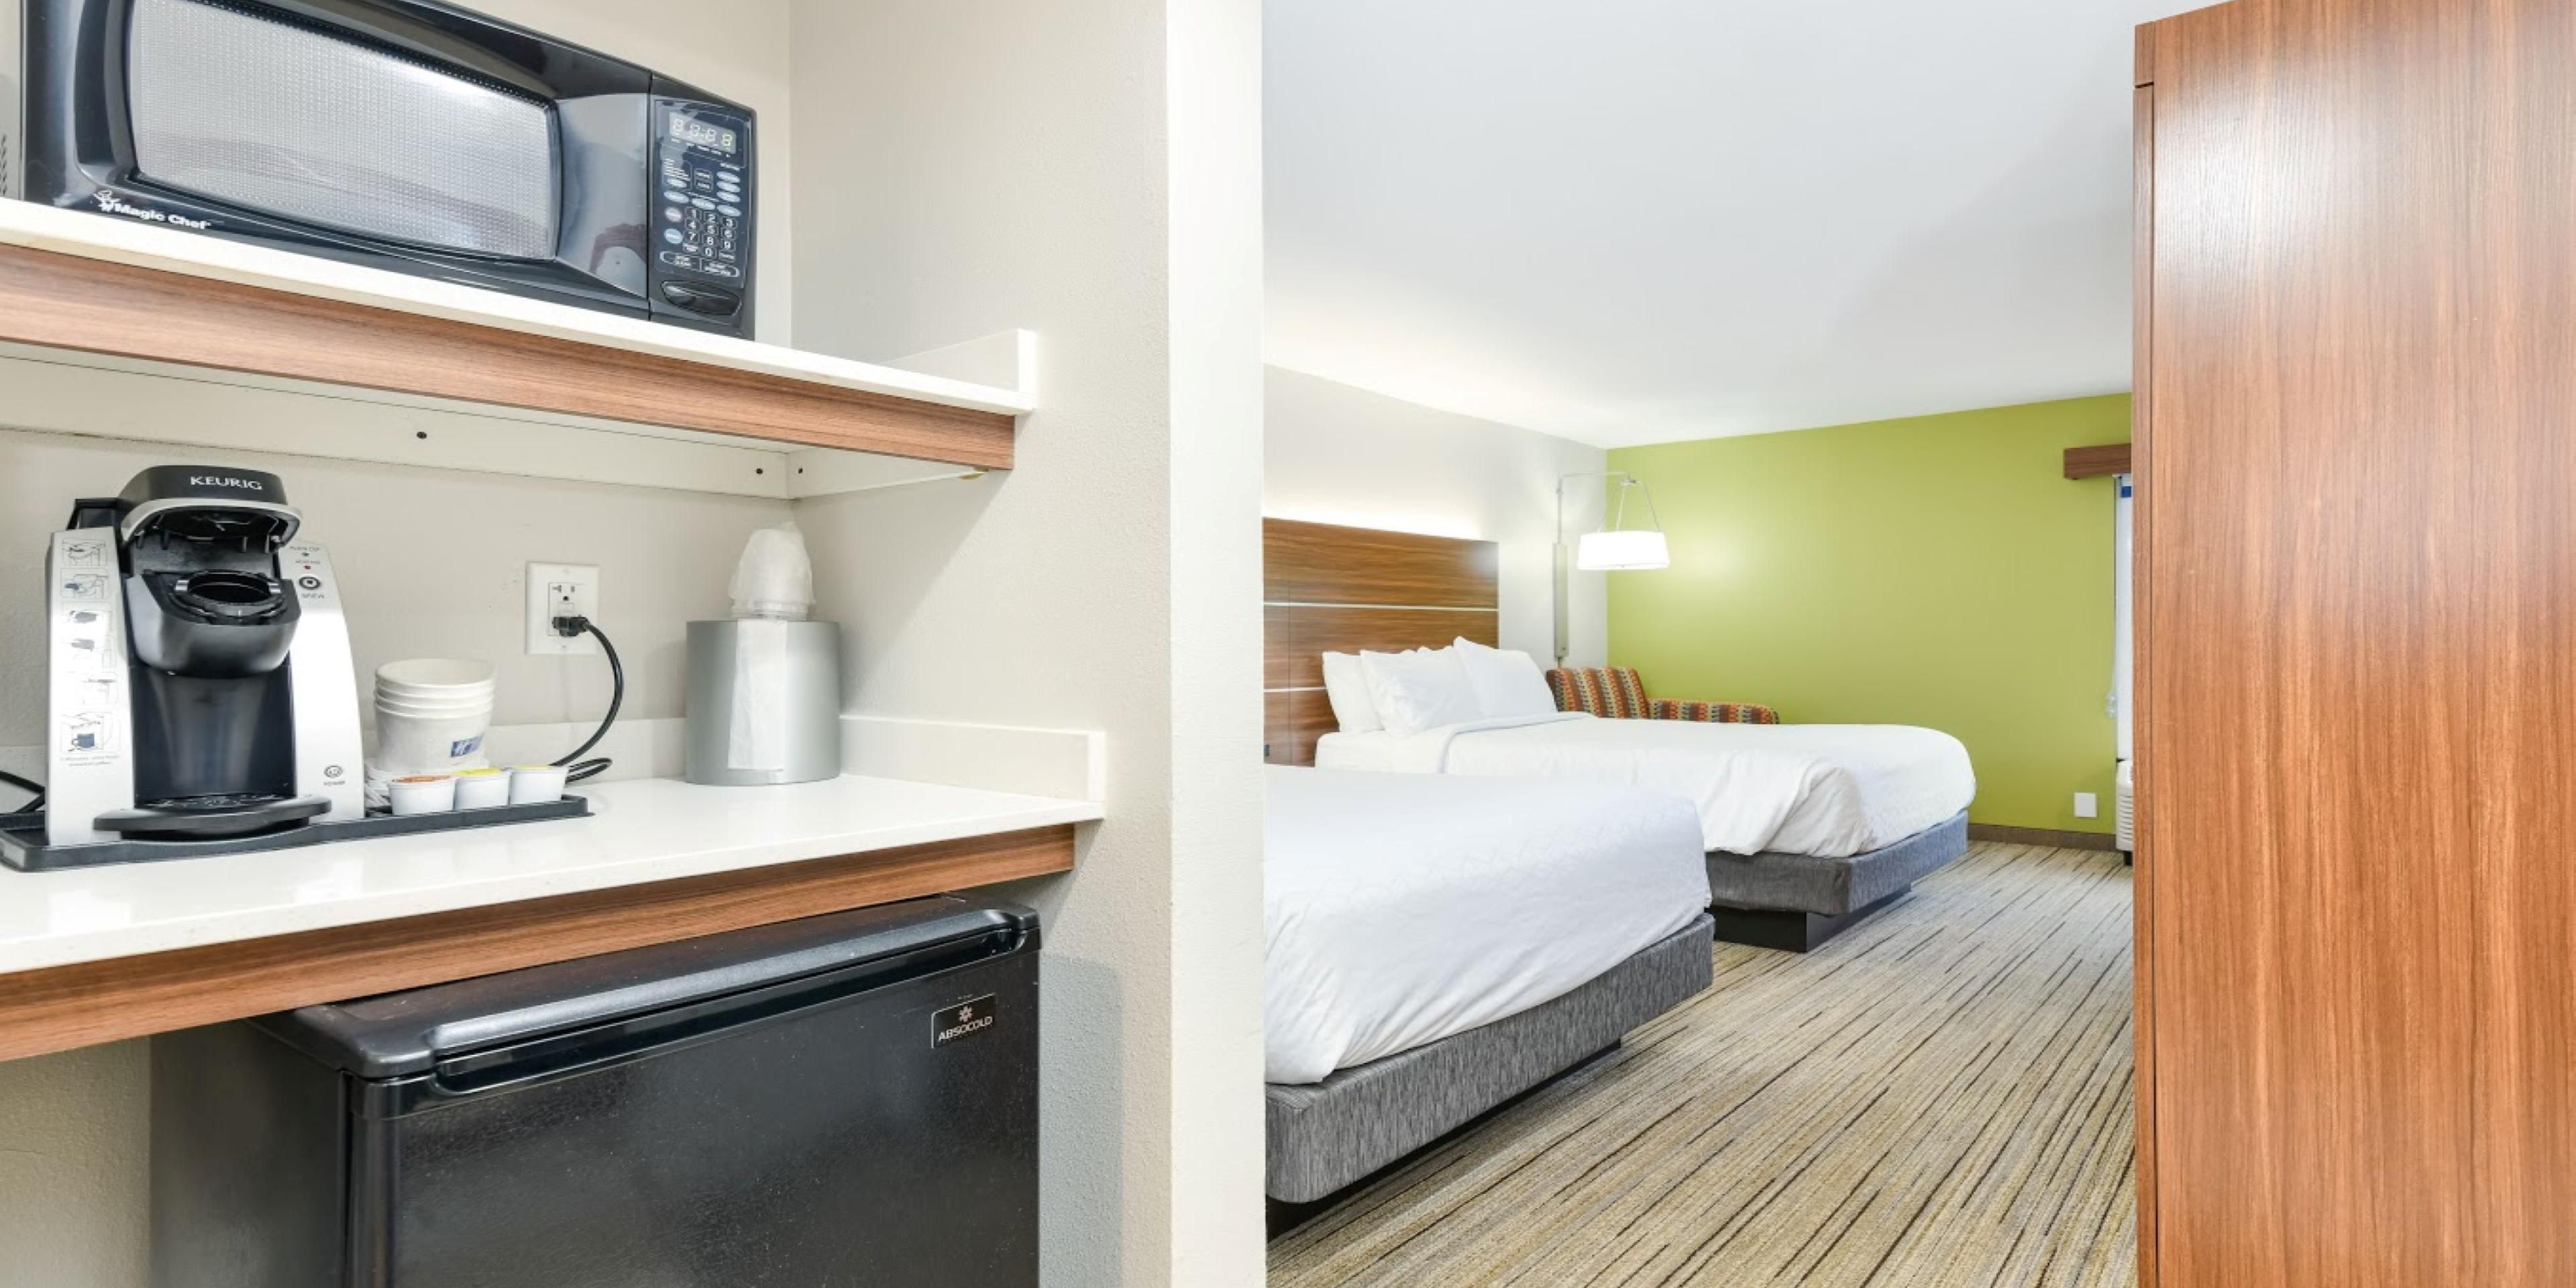 We understand how important cleanliness is to you and as an IHG branded hotel, we deliver the IHG Clean Promise.  If your room is not cleaned to your satisfaction, please contact our Front Desk immediately- we promise to make it right- the is the IHG Clean Promise. 